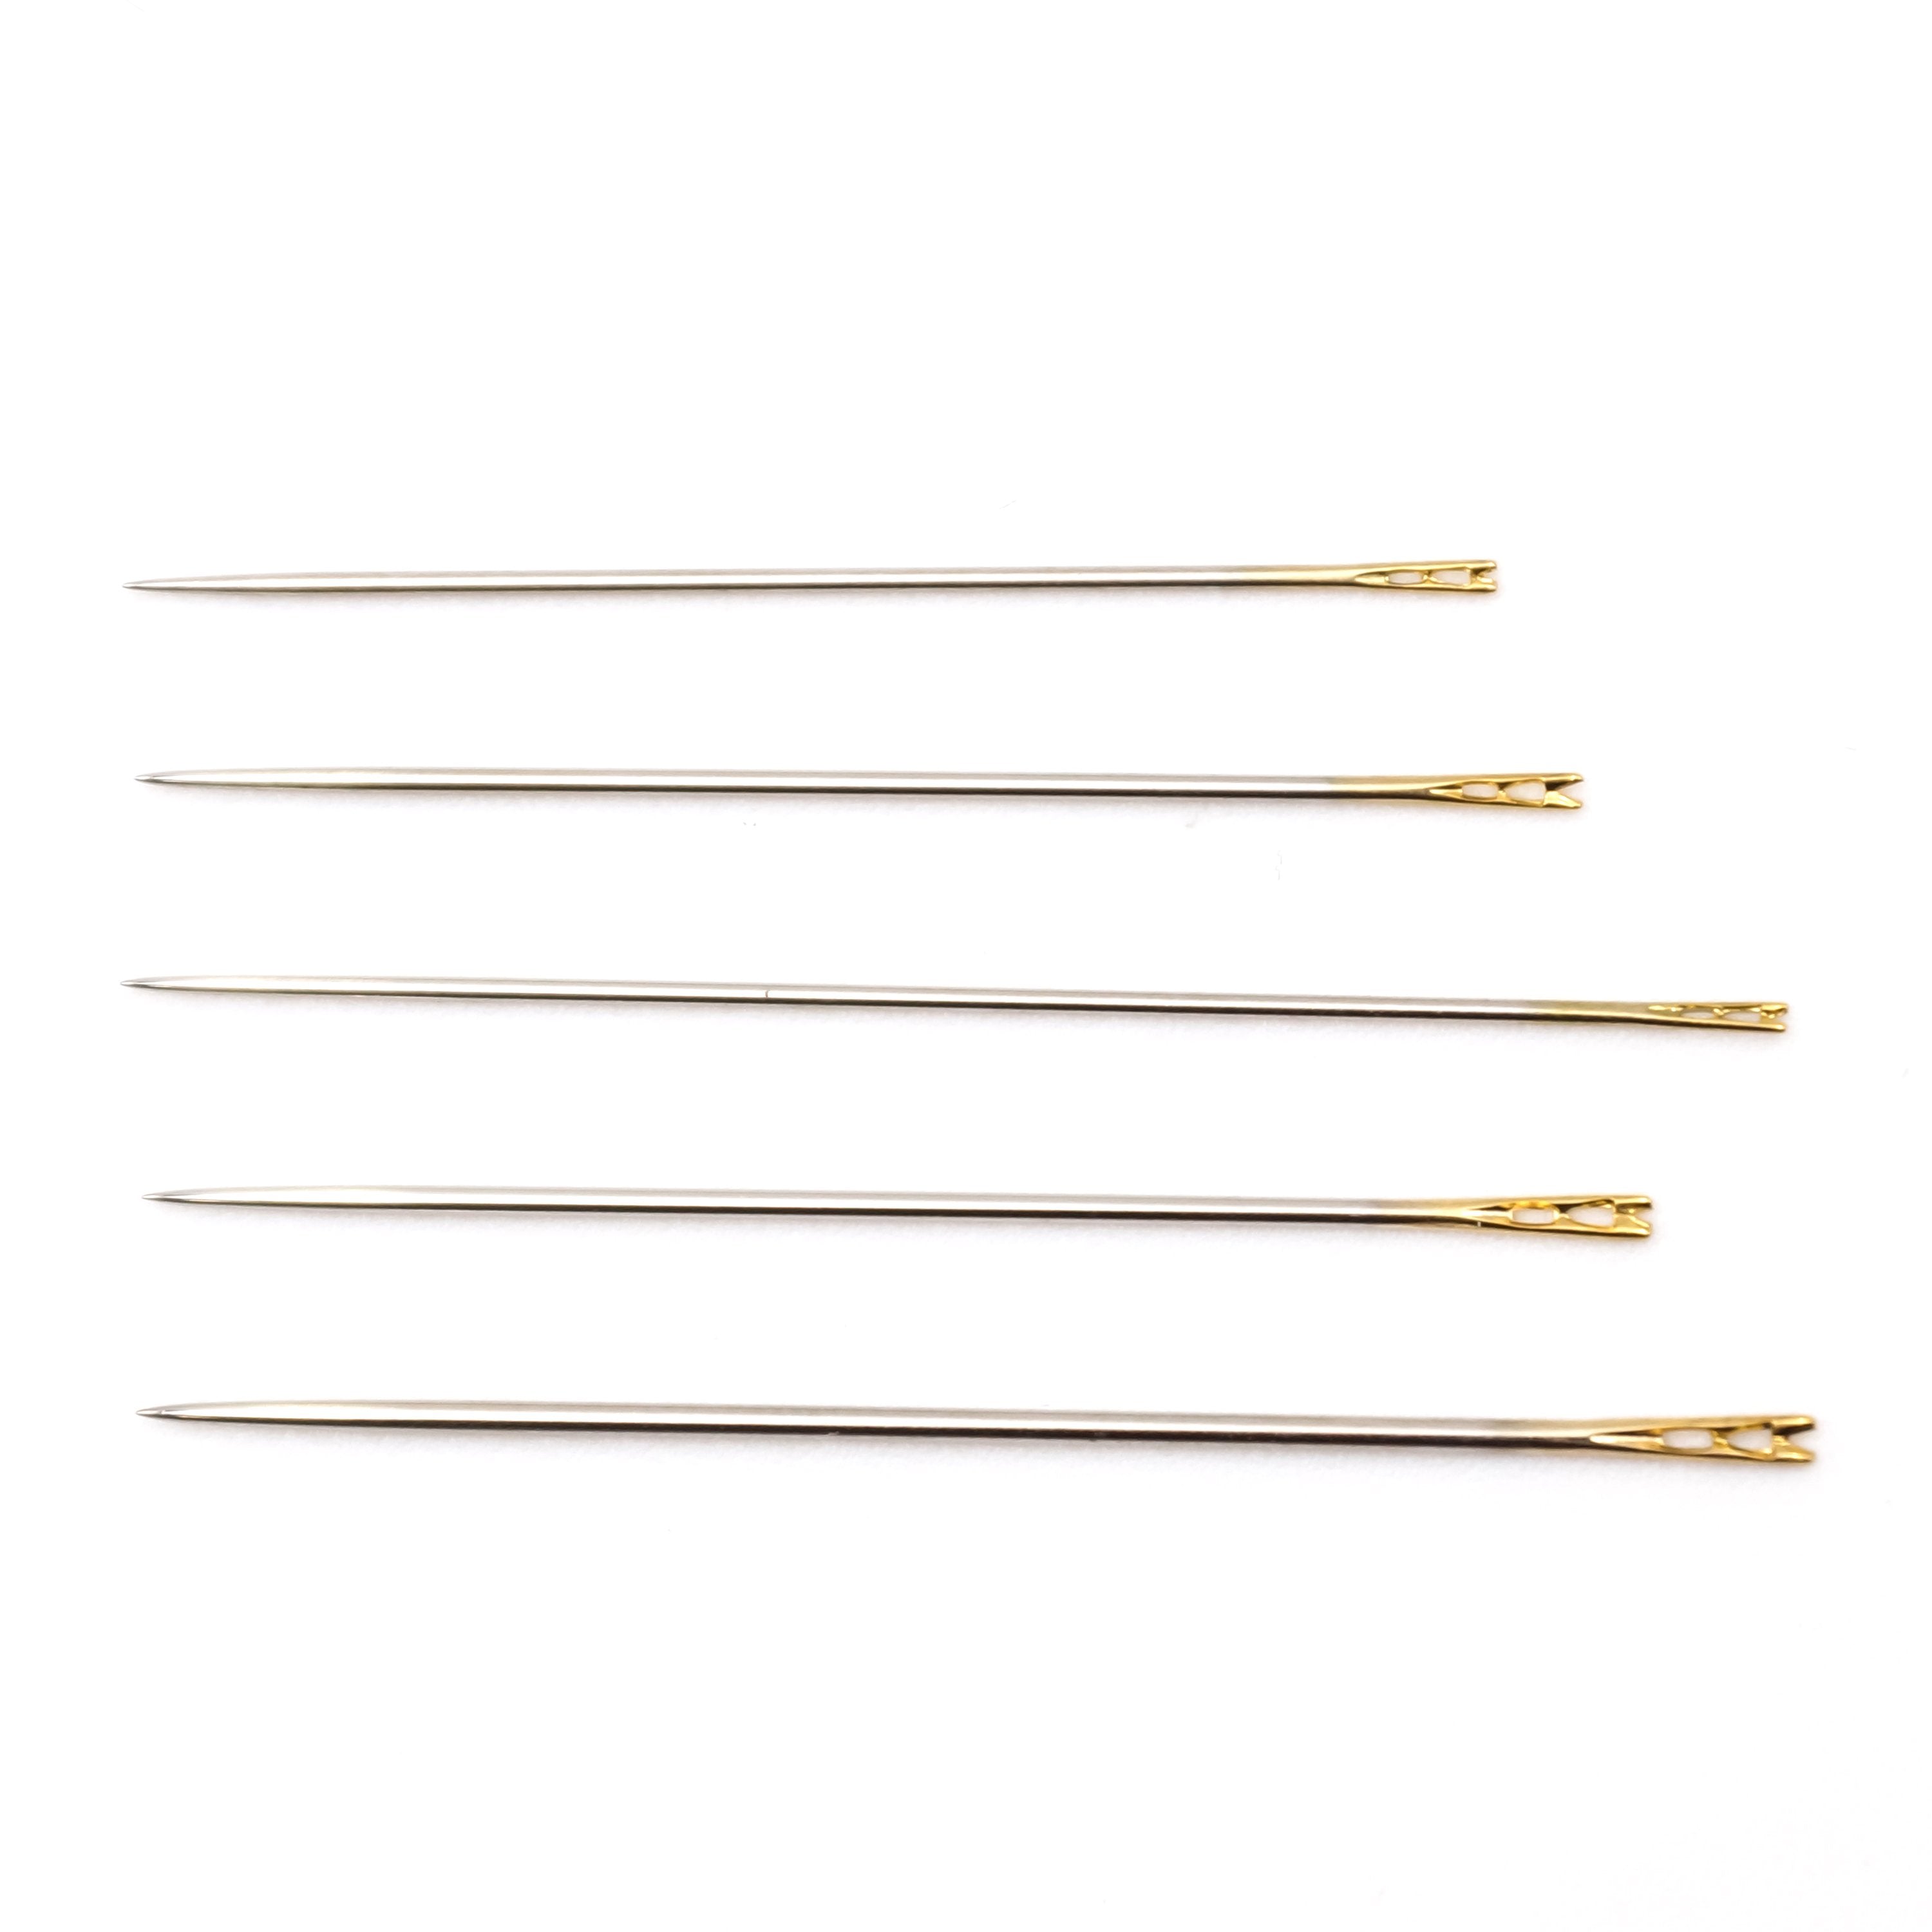 Self Threading Needles for Hand Sewing - YAWALL 24 Pieces Embroidery Thread  Needles Easy Thread Needles for Hand Sewing Side Threading Needle for  Quilting with Wooden Needle Case Carving Pattern 24PCS-Gold